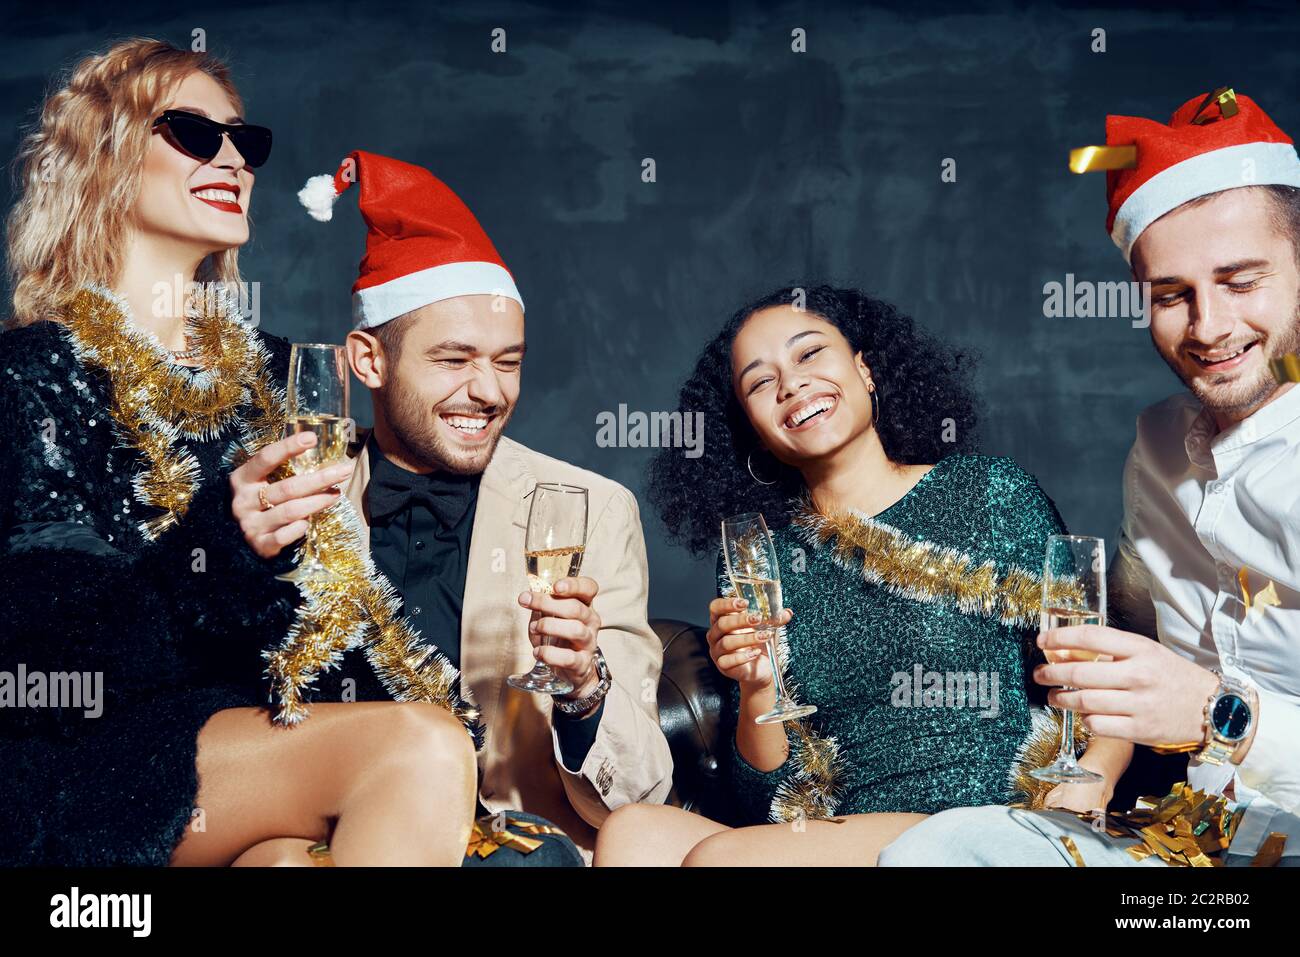 Group of happy smiling friends celebrate New Year together, having fun and drinking champagne Stock Photo